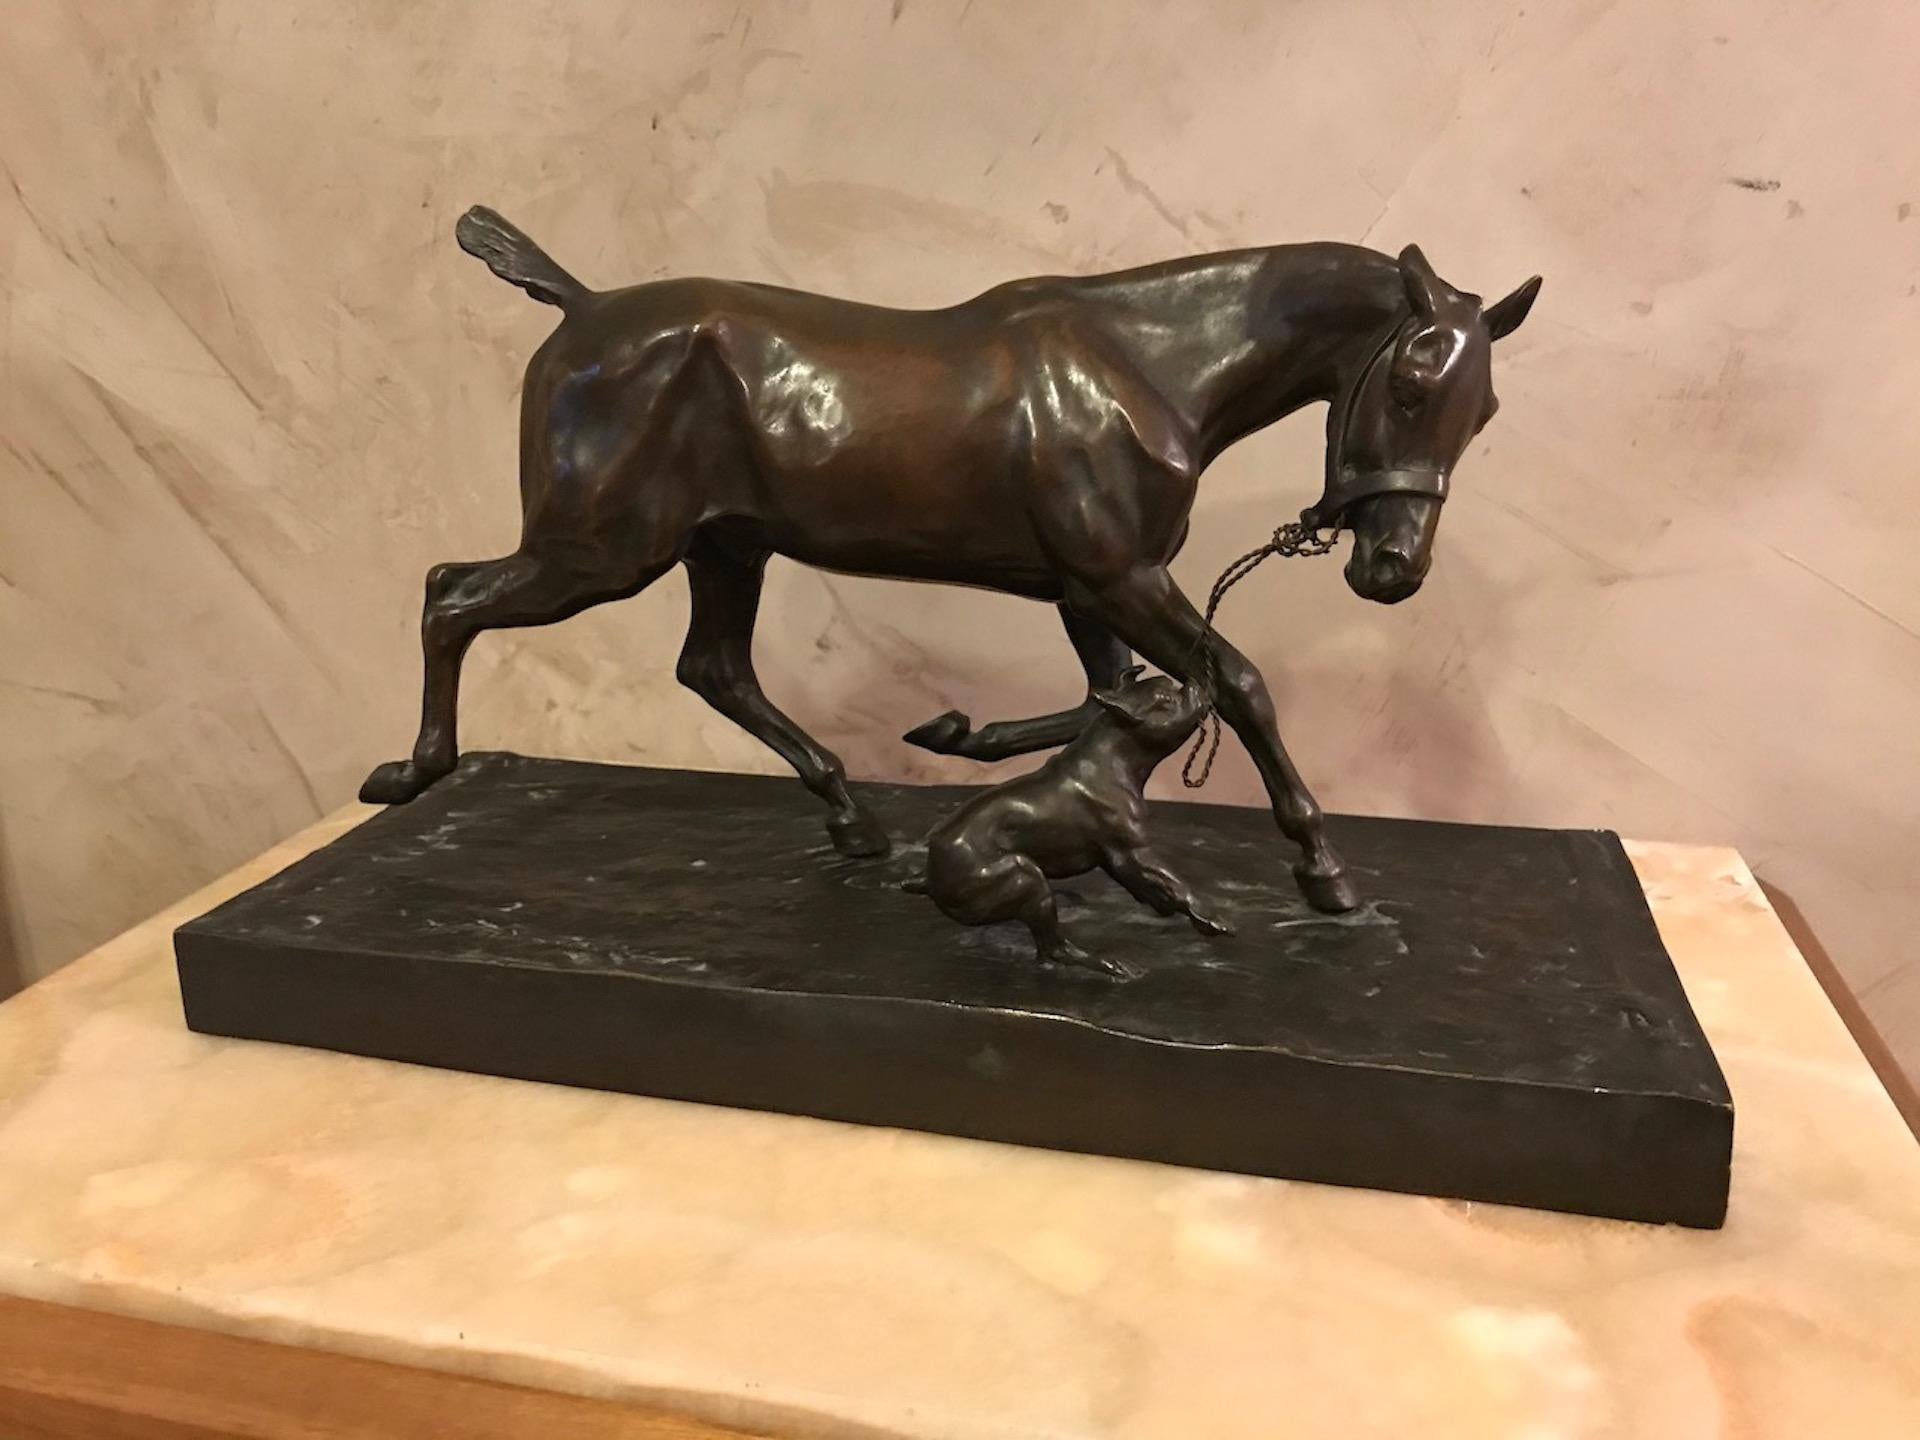 Beautiful Decorative French animal bronze sculpture ''Cheval et chien'' (horse and dog) by Auguste Vimar. (1851-1916, Marseille FRANCE).
Auguste Vimar is a French painter, sculptor, designer and illustrator.
He is best known for his talents as an